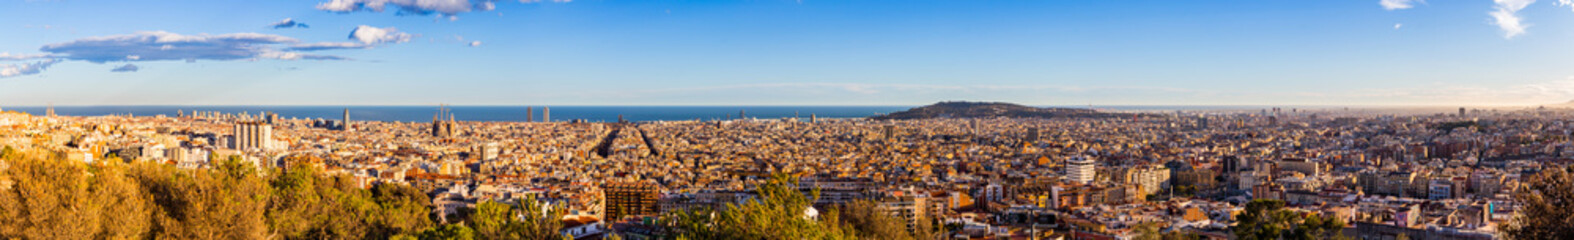 Panorama view of Barcelona from Park Guell in sunny day in winter. High resolution image. Spain